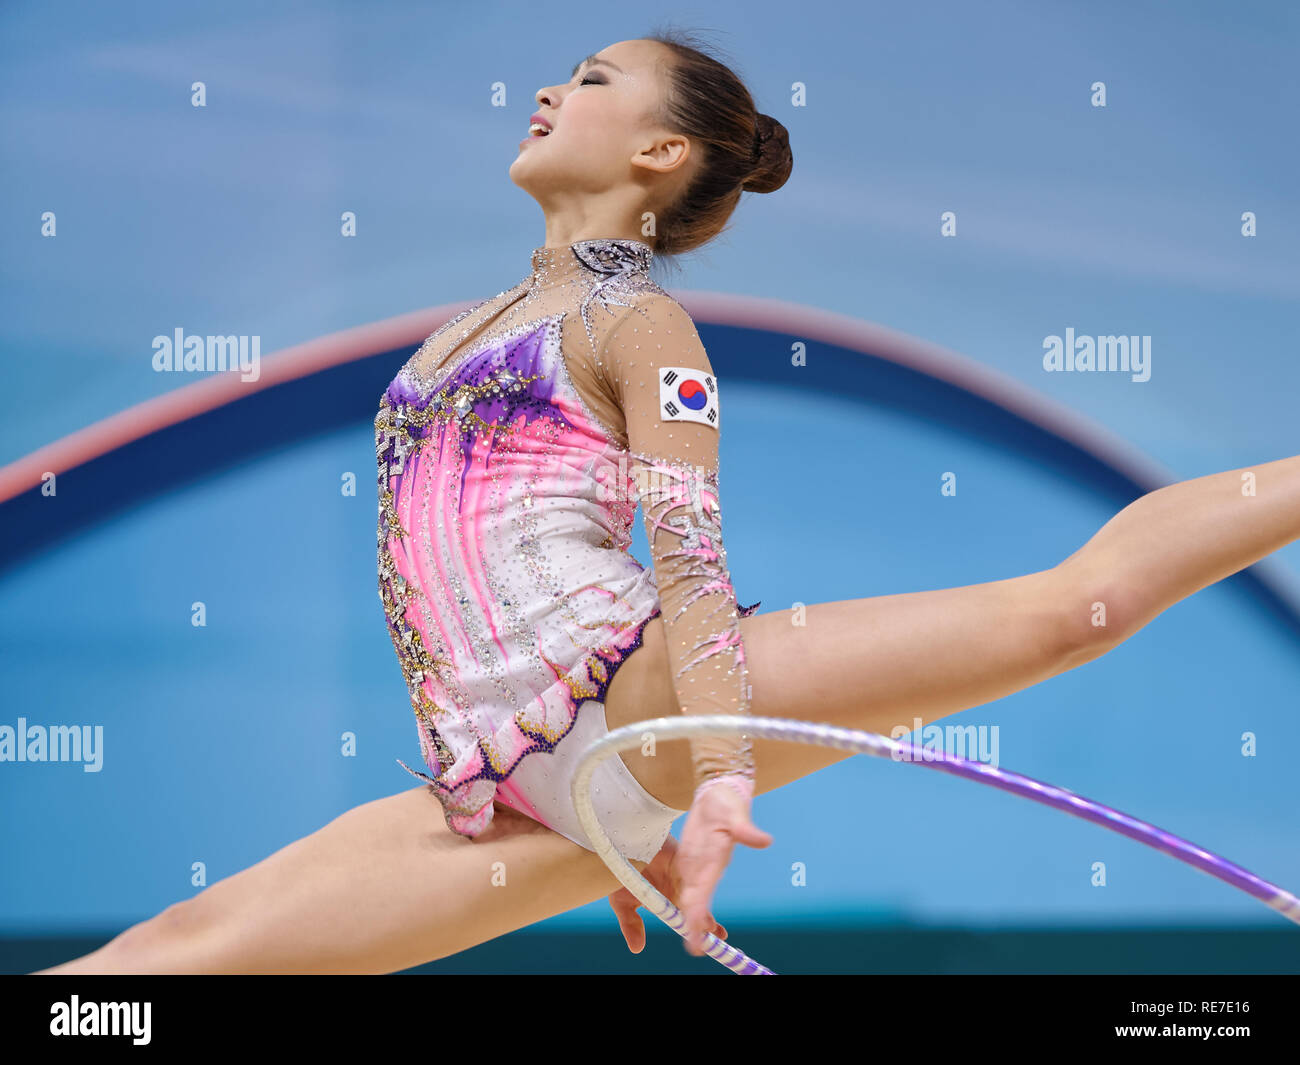 Kiev, Ukraine - August 28, 2013: Yeon Jae Son, Korea performs with hoop during 32nd Rhythmic Gymnastics World Championships. The event is held in Pala Stock Photo